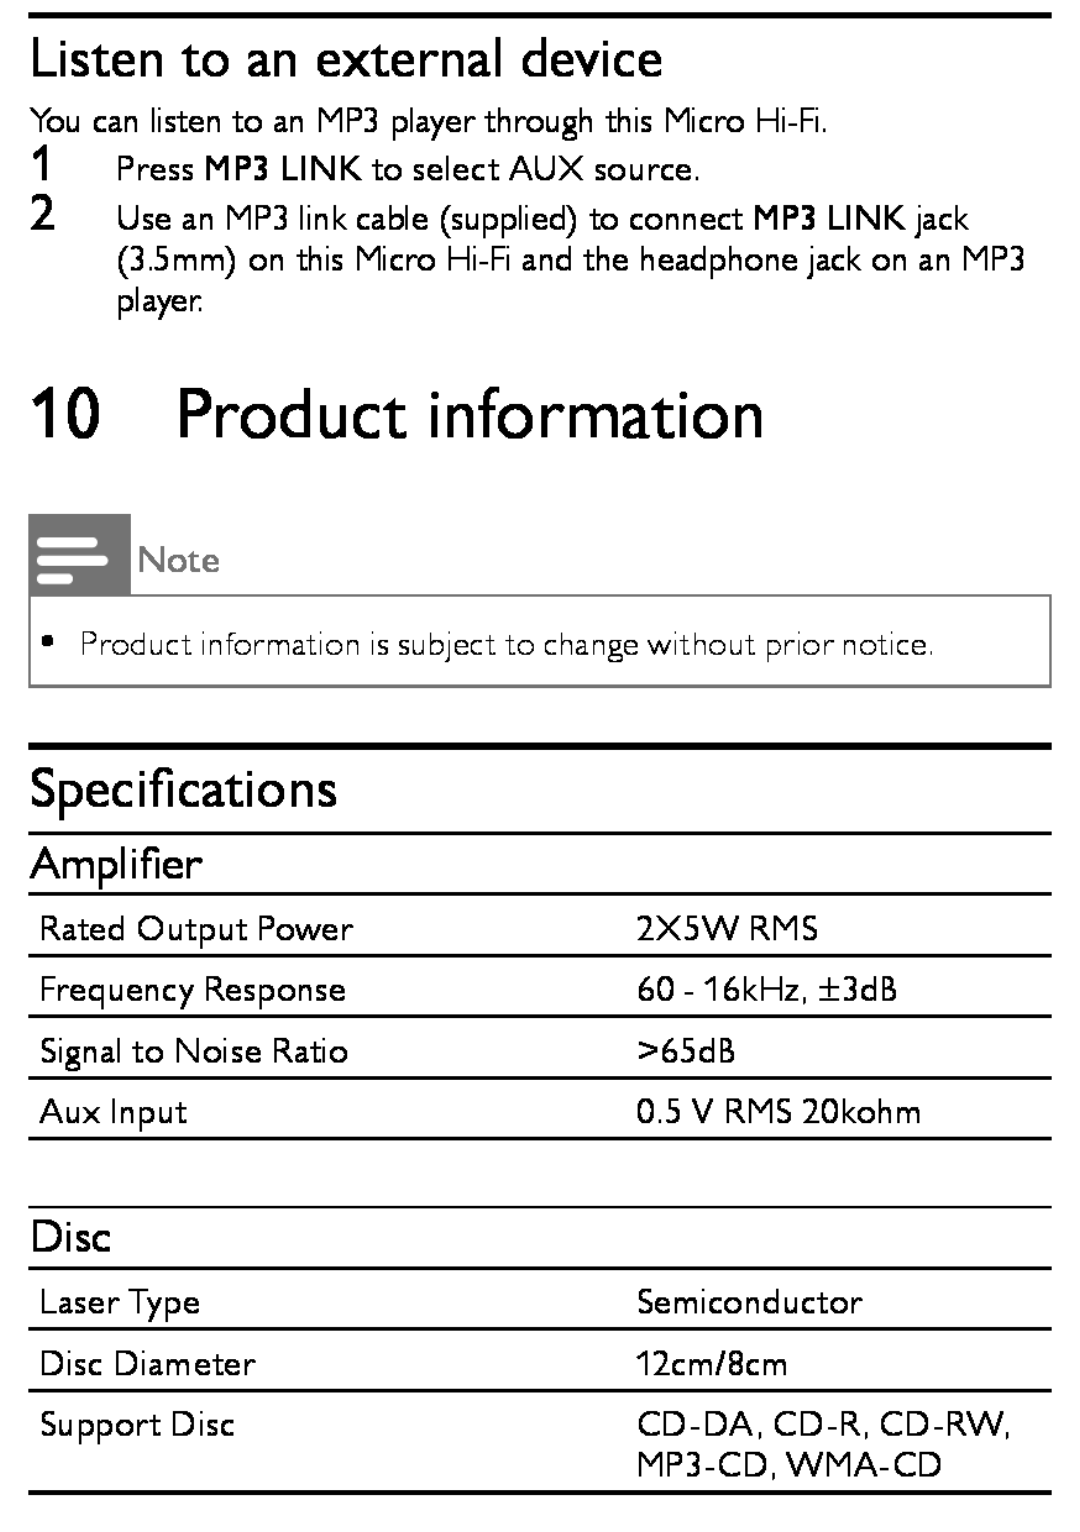 Philips MCM166 user manual Product information, Listen to an external device, Speciﬁcations, Ampliﬁer, Disc 